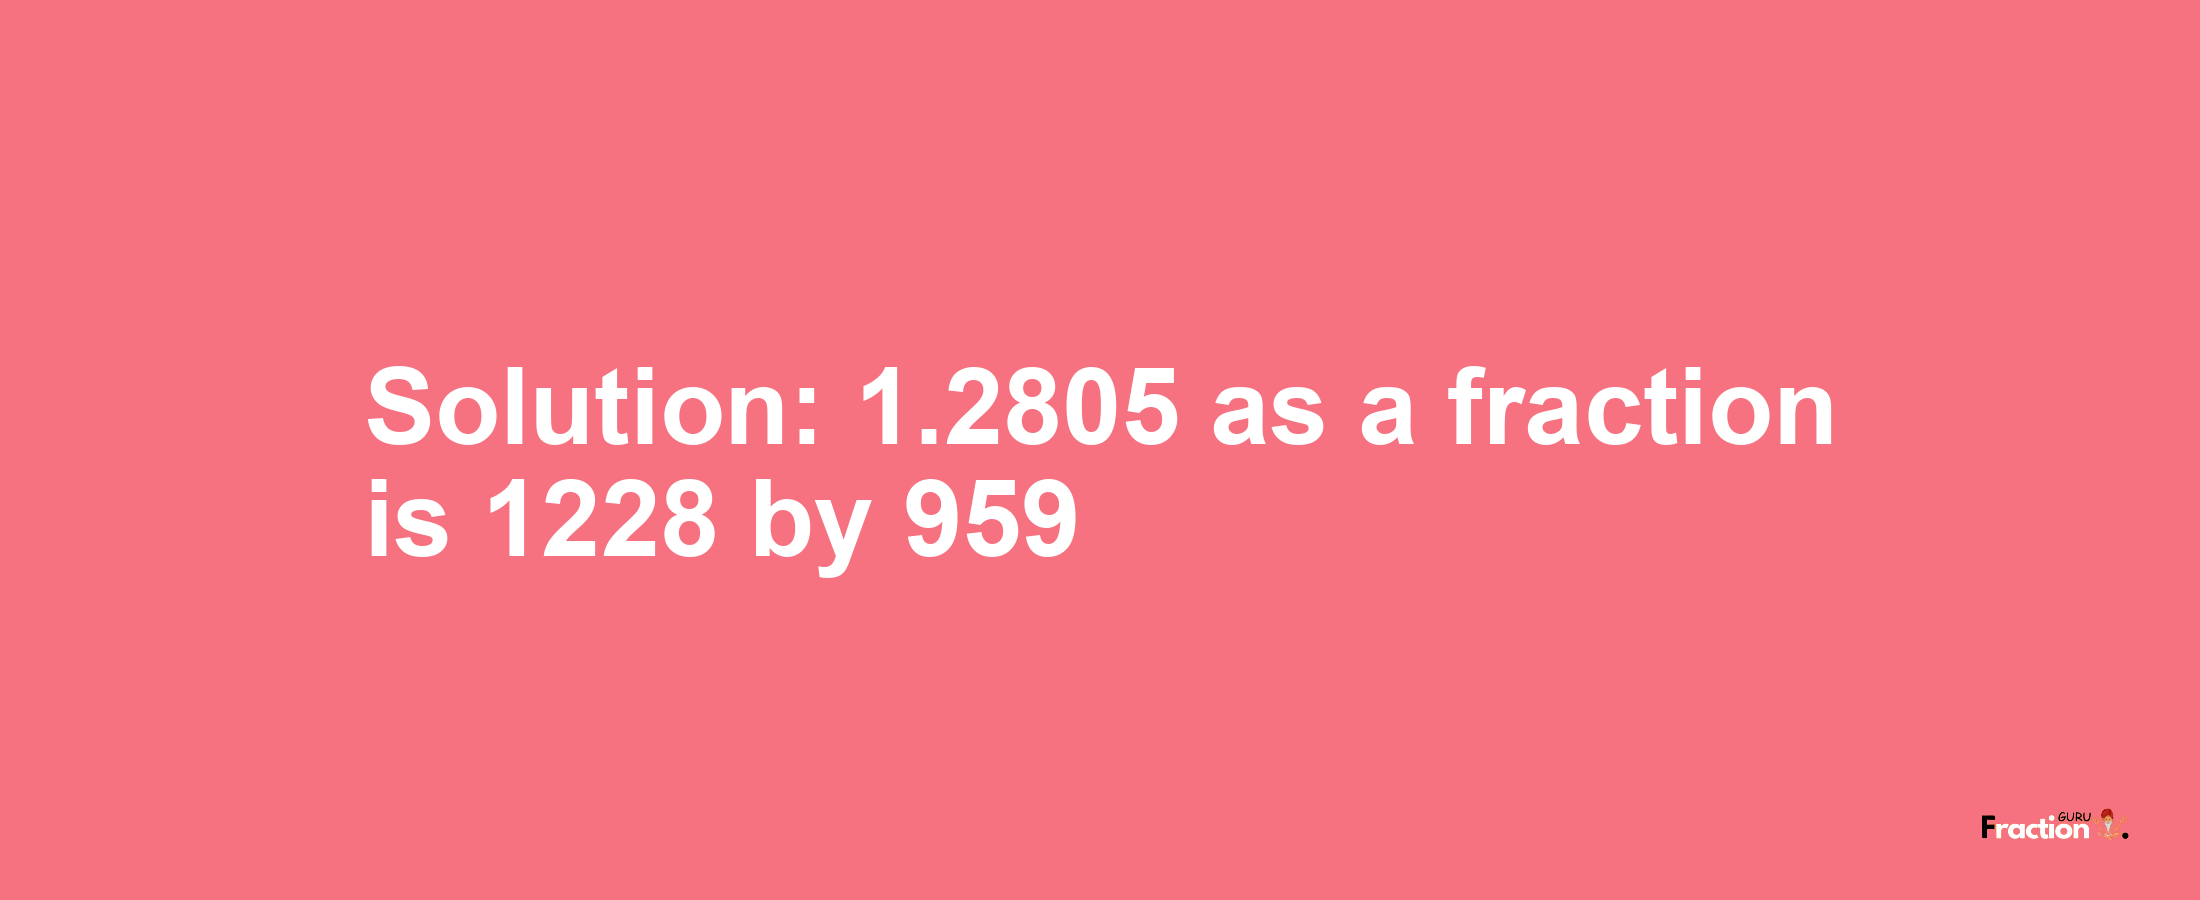 Solution:1.2805 as a fraction is 1228/959